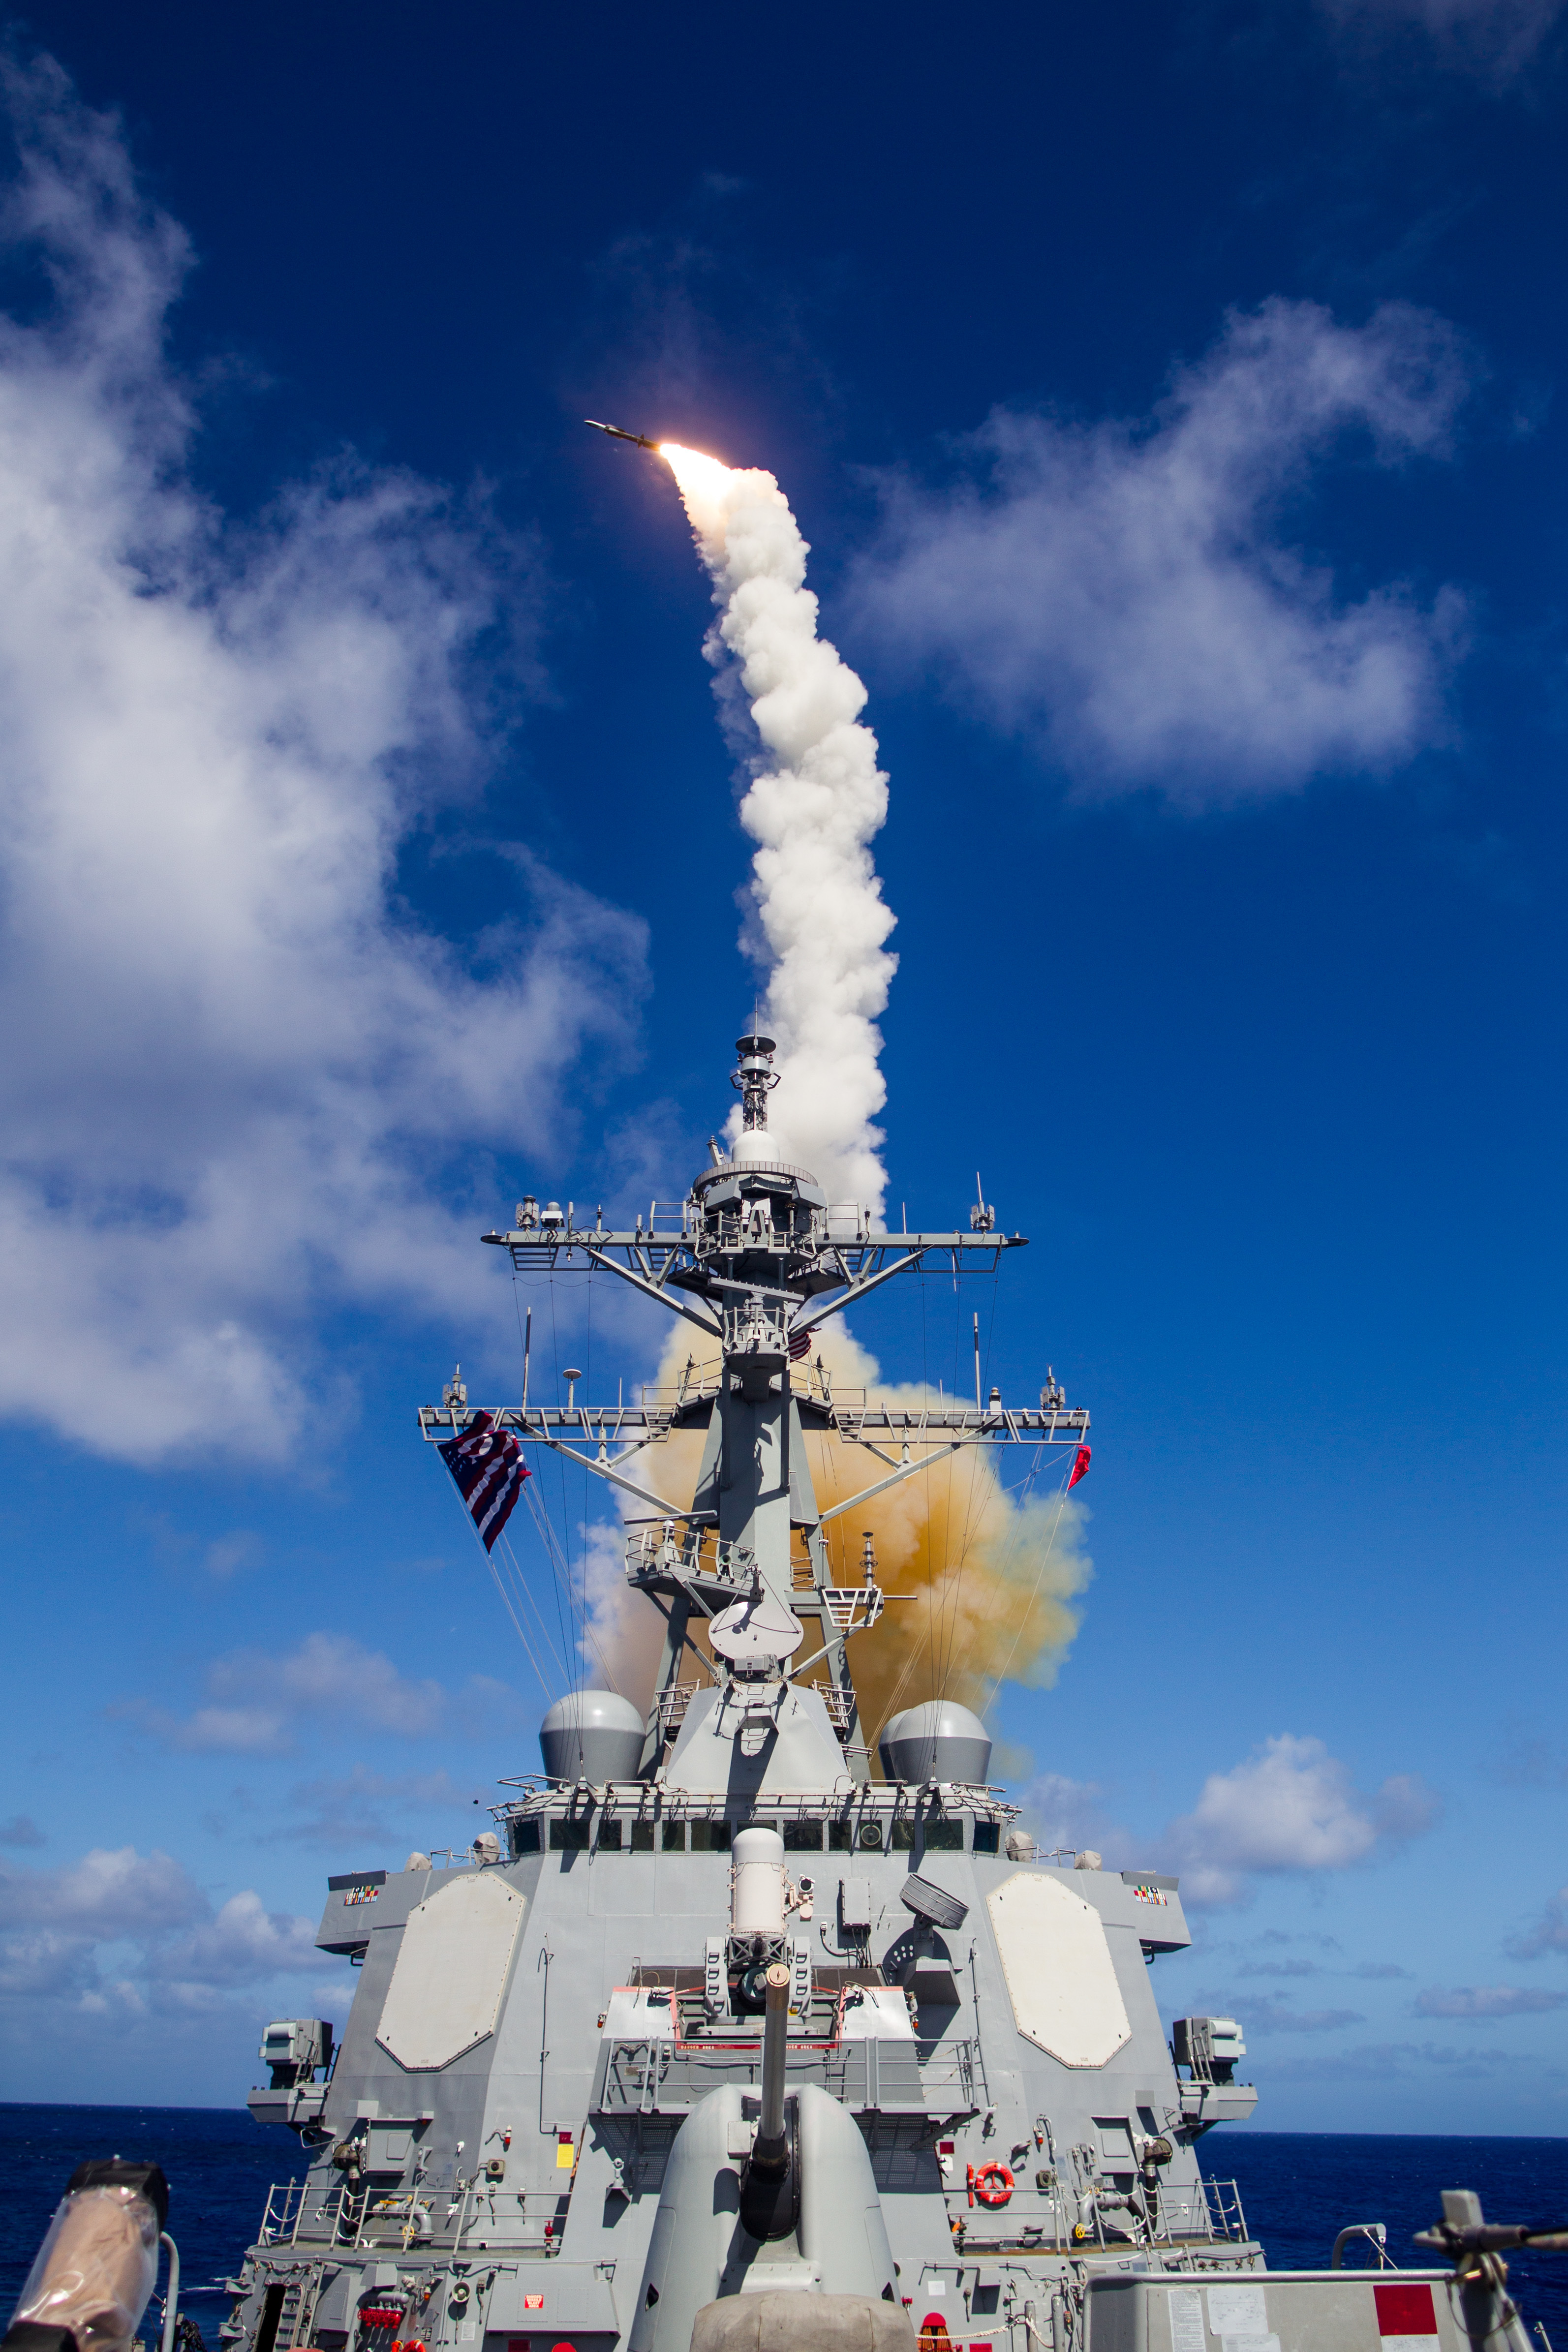 A BQM-74E cruise missile target was launched from the Pacific Missile Range Facility (PMRF) on Kauai, Hawaii, on Aug. 1, 2015, as part of a joint Navy/Missile Defense Agency test. Under Multi-Domain Battle, the Army might launch land-based cruise missiles to supplement ship-based sea control efforts. MDA photo.